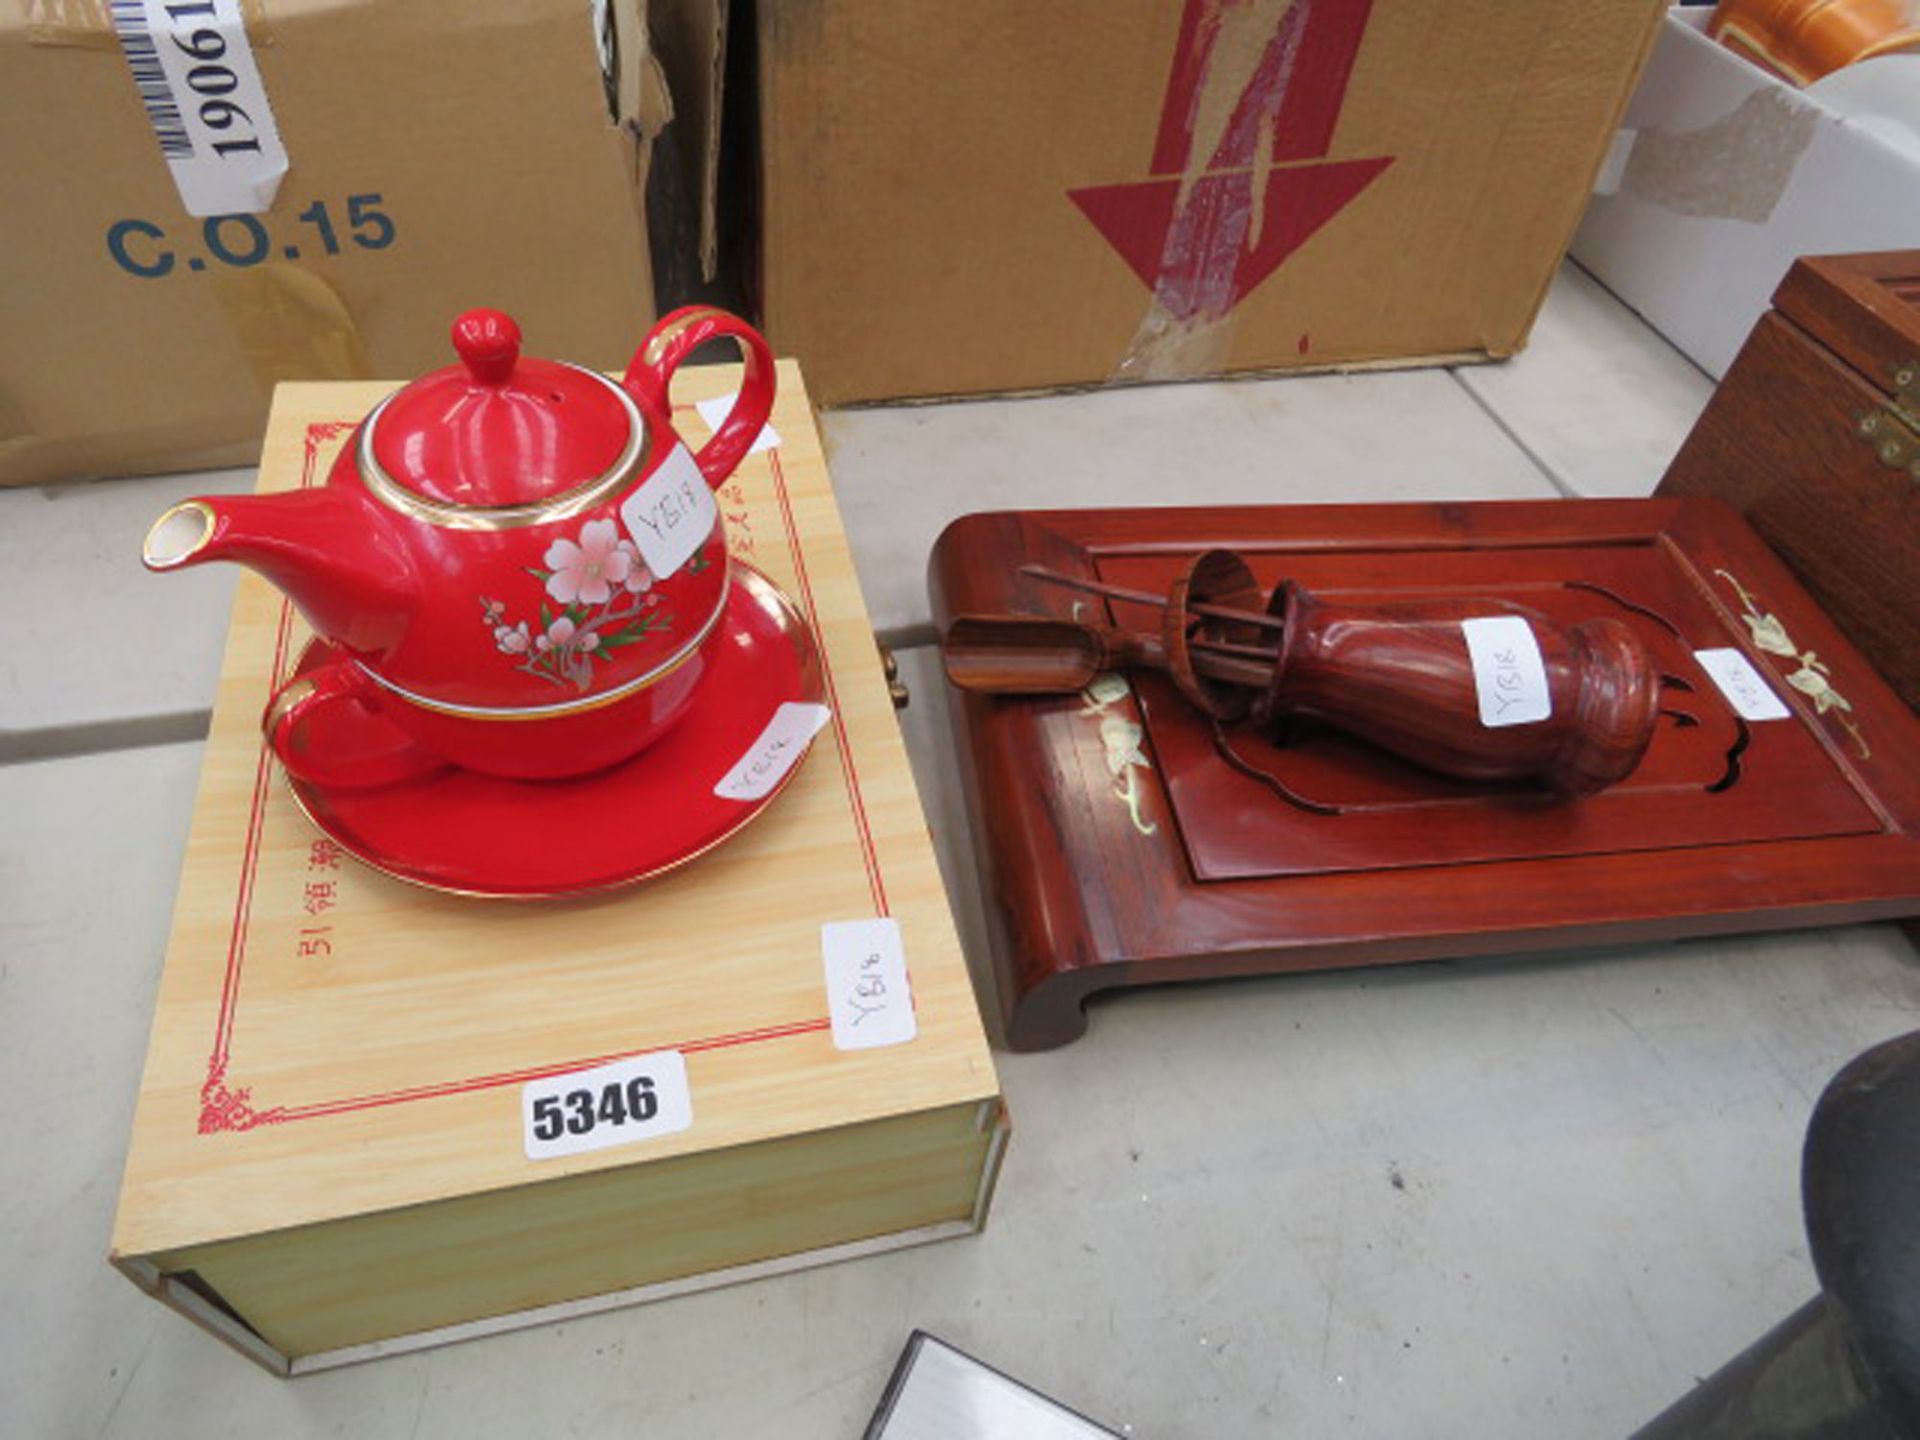 Modern Oriental part tea service plus a wooden serving tray and utensils